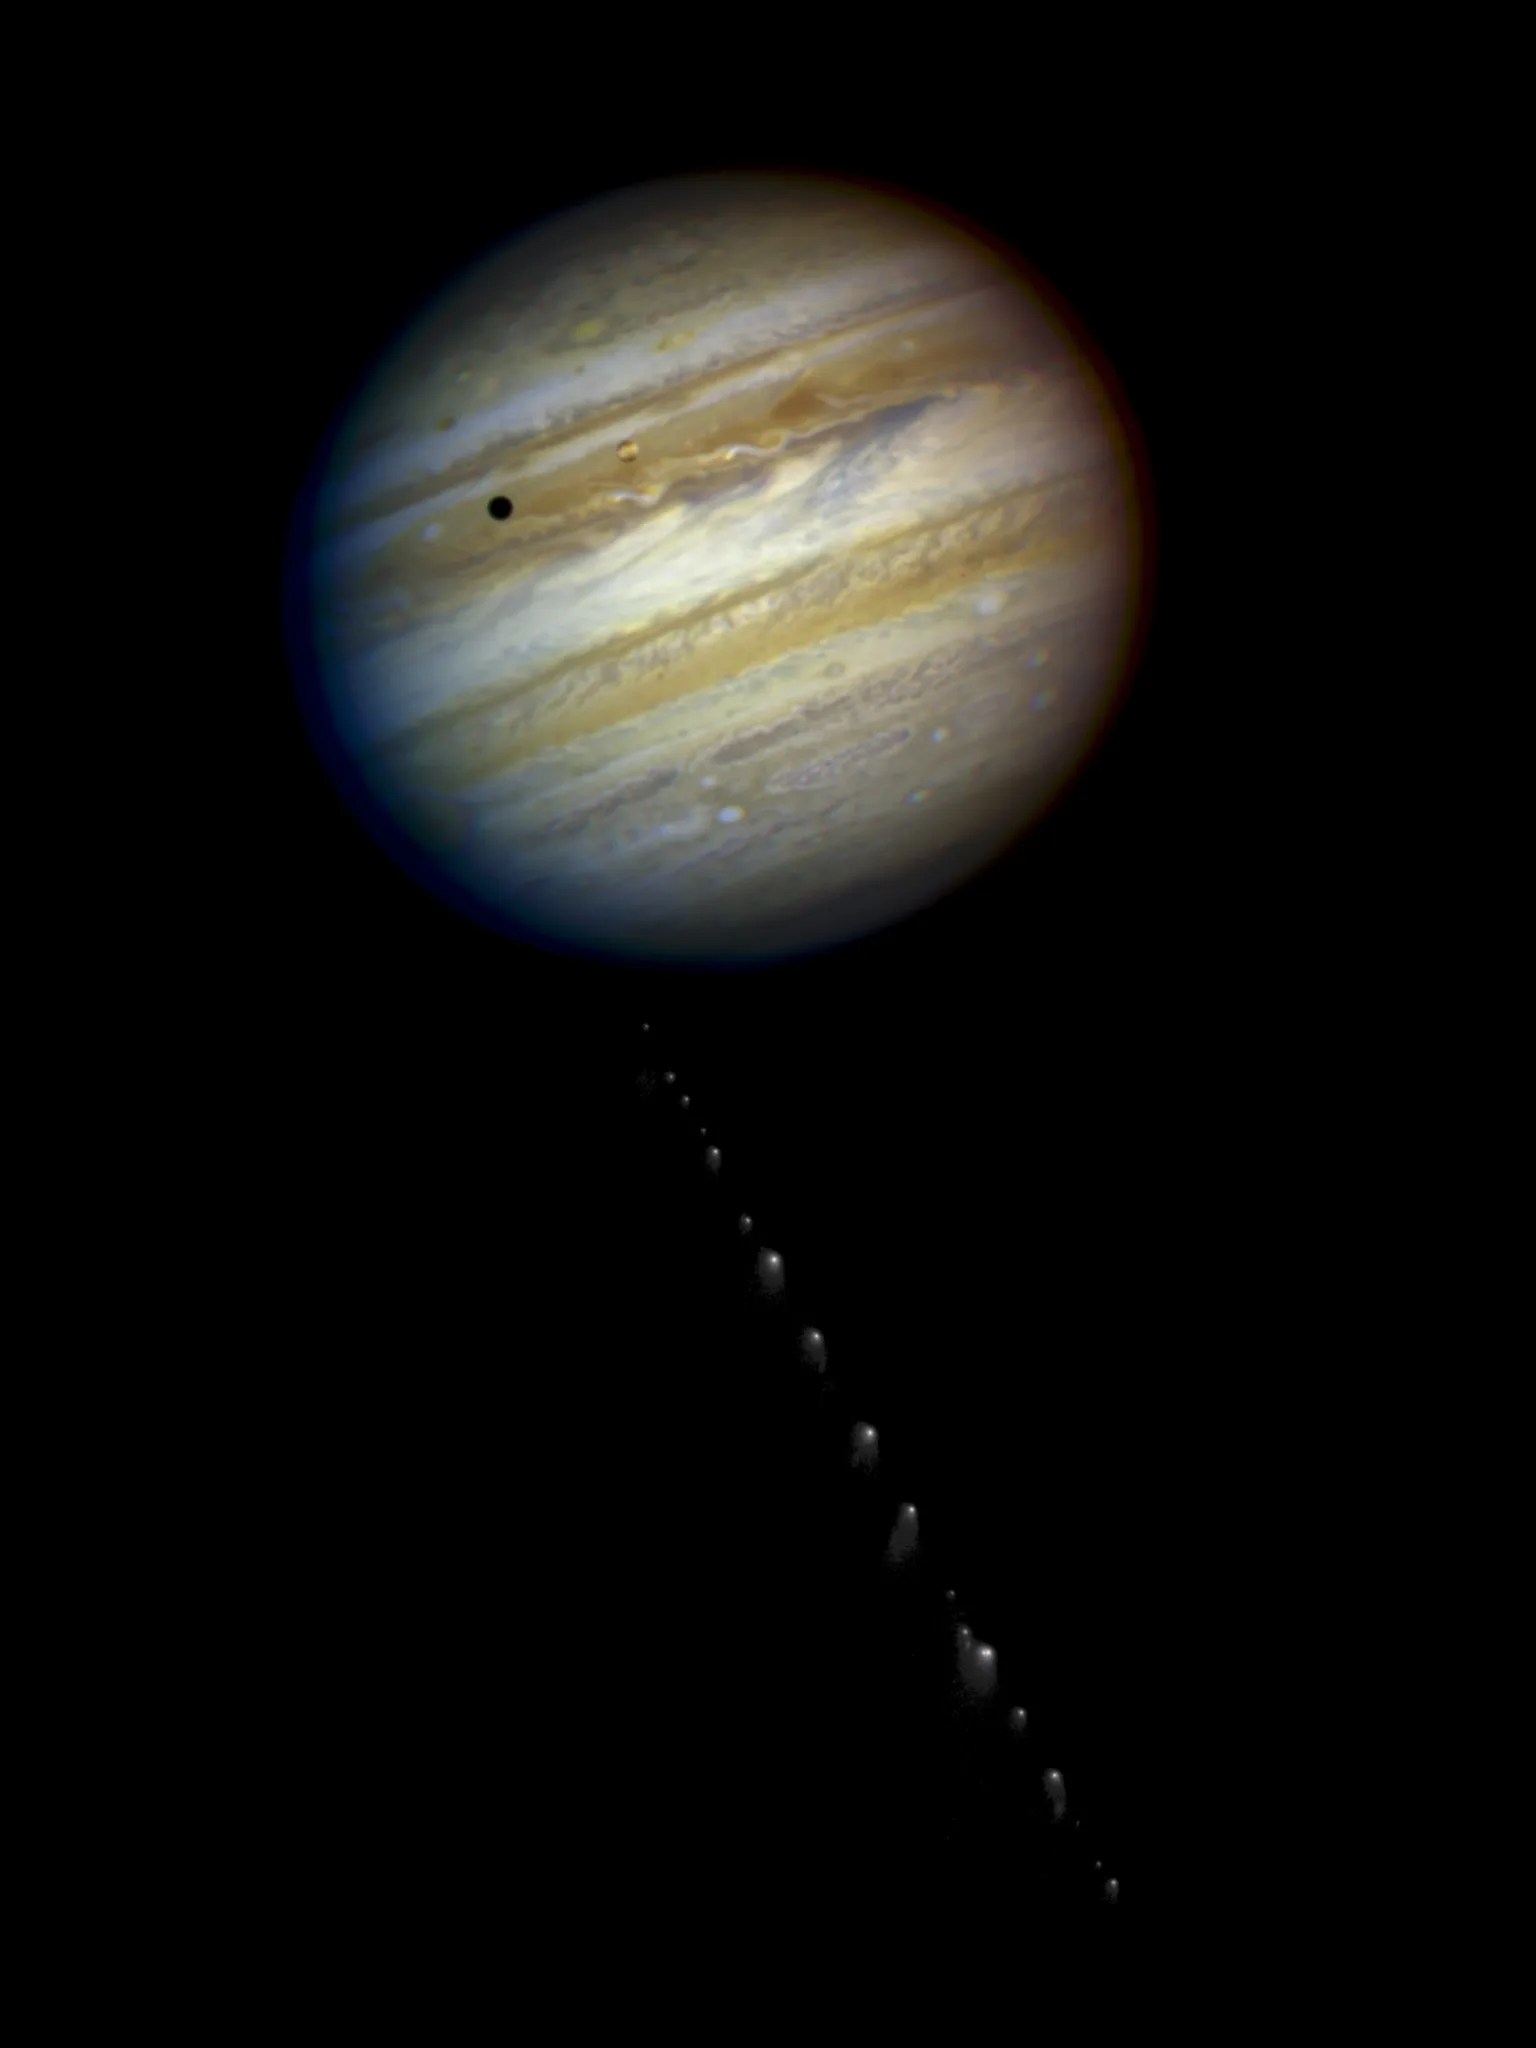 One of Jupiter's moons transits it and casts a shadow on Jupiter's atmosphere. The compilation of images as the comet approaches the planet from the bottom of the image forms a "trail".